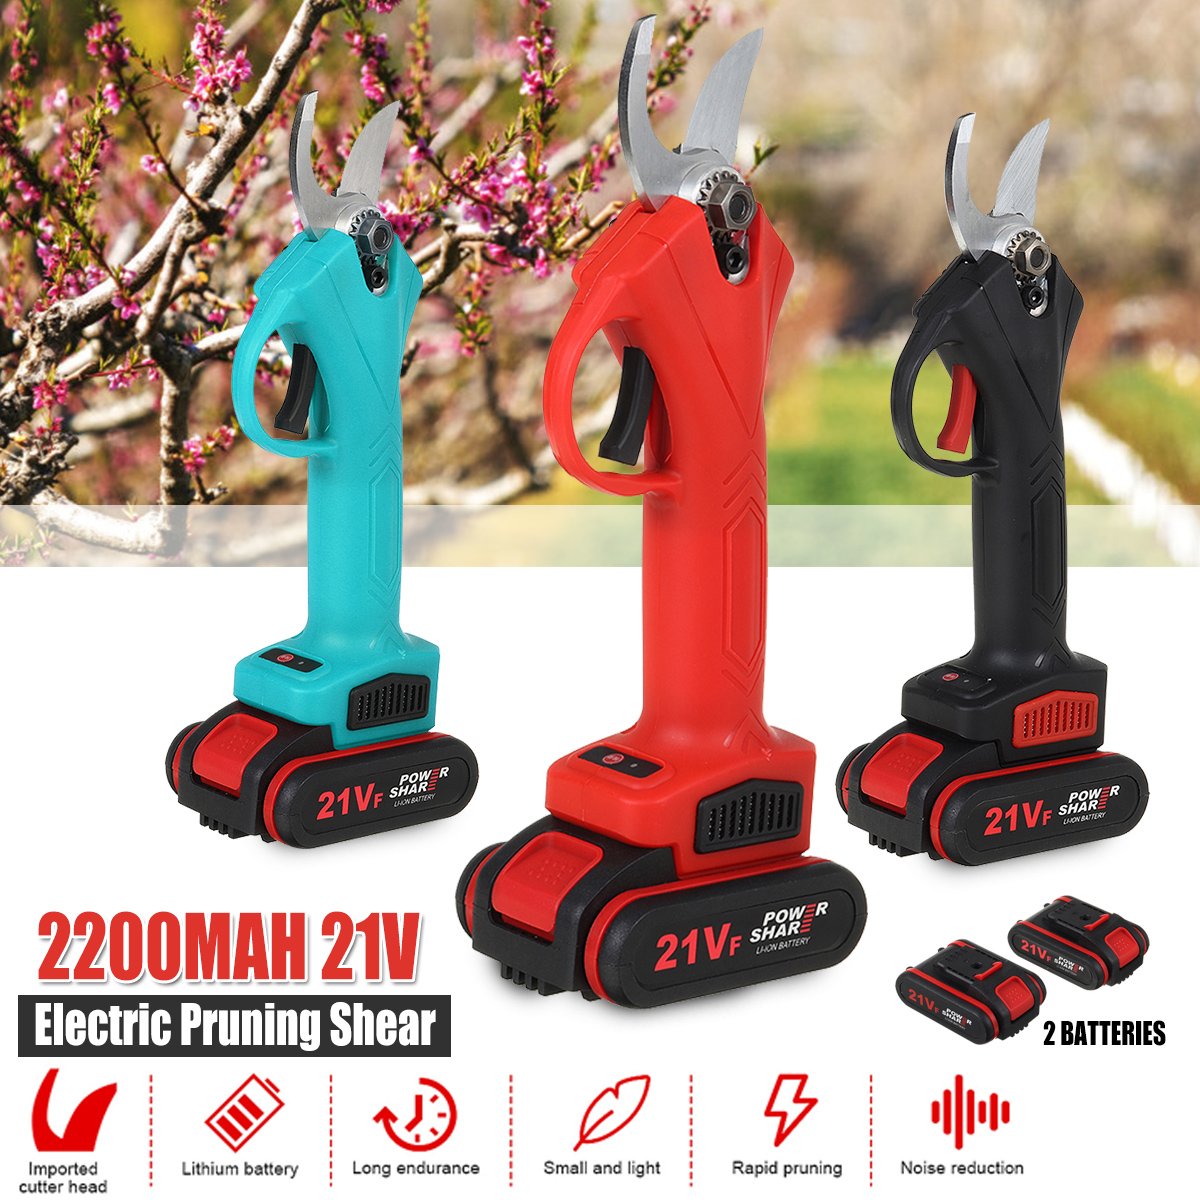 21V-Wireless-25mm-Rechargeable-Electric-Scissors-Branch-Pruning-Shear-Tree-Cutting-Tools-W-2-Battery-1749247-1